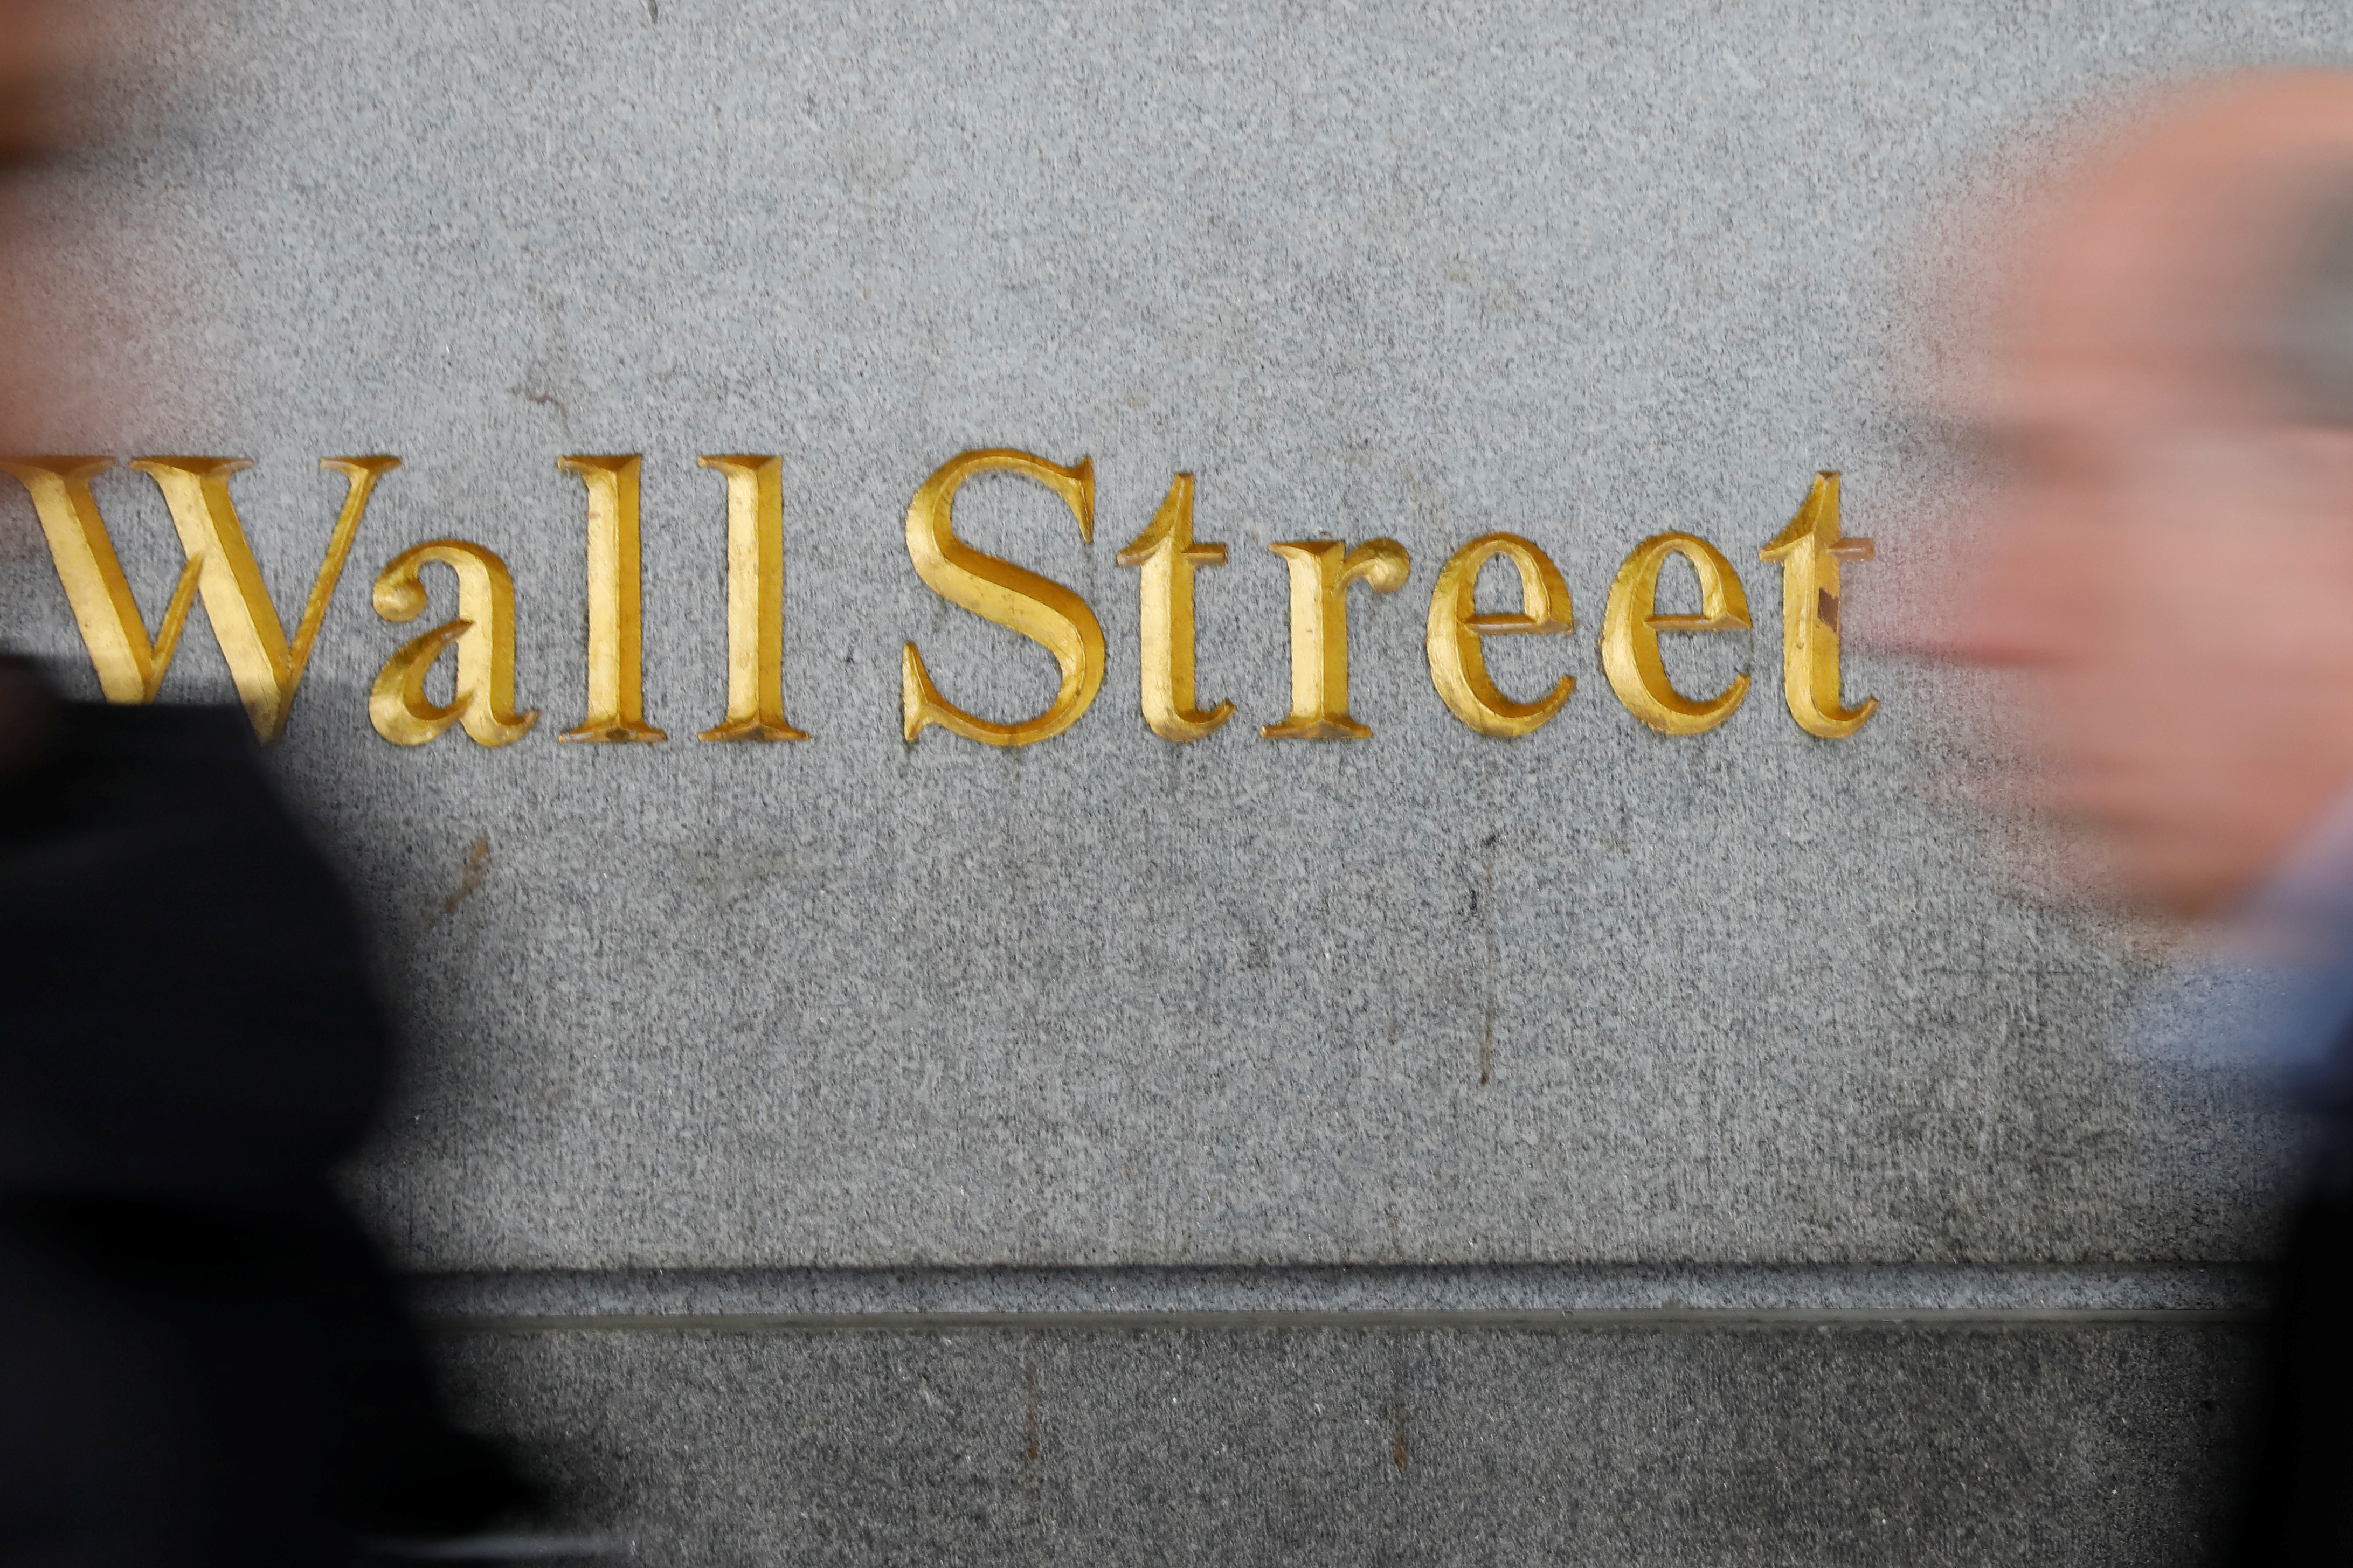 People walk by a Wall Street sign close to the NYSE in New York